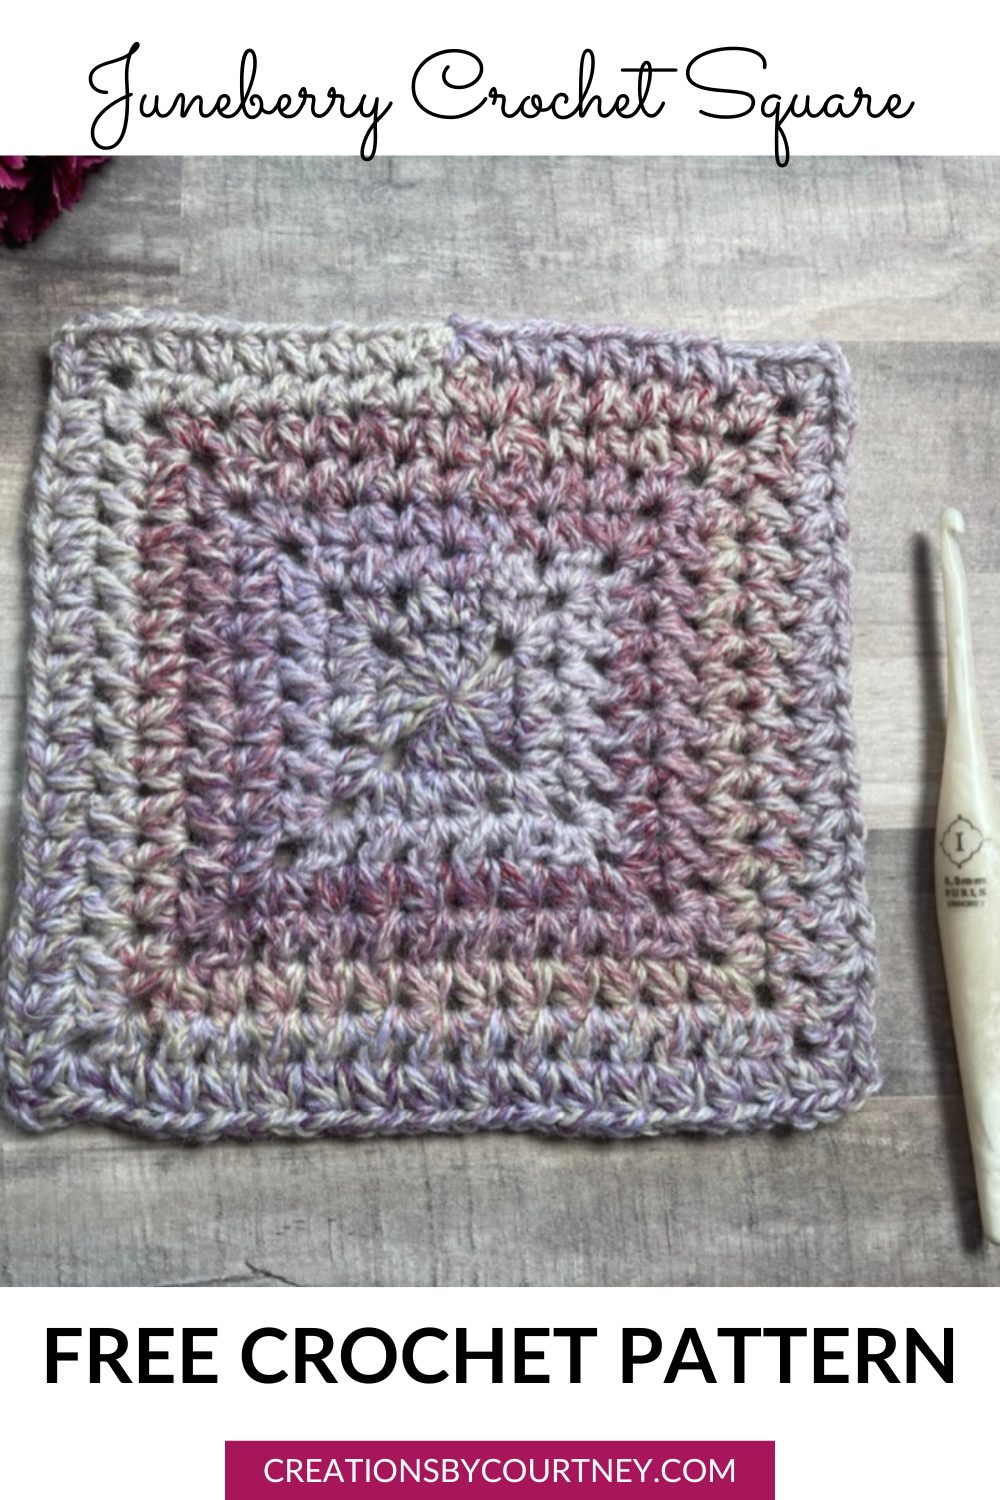 An image of a crochet square made in a color changing yarn of shades of purple and gray. The crochet square is made of a cluster stitch.